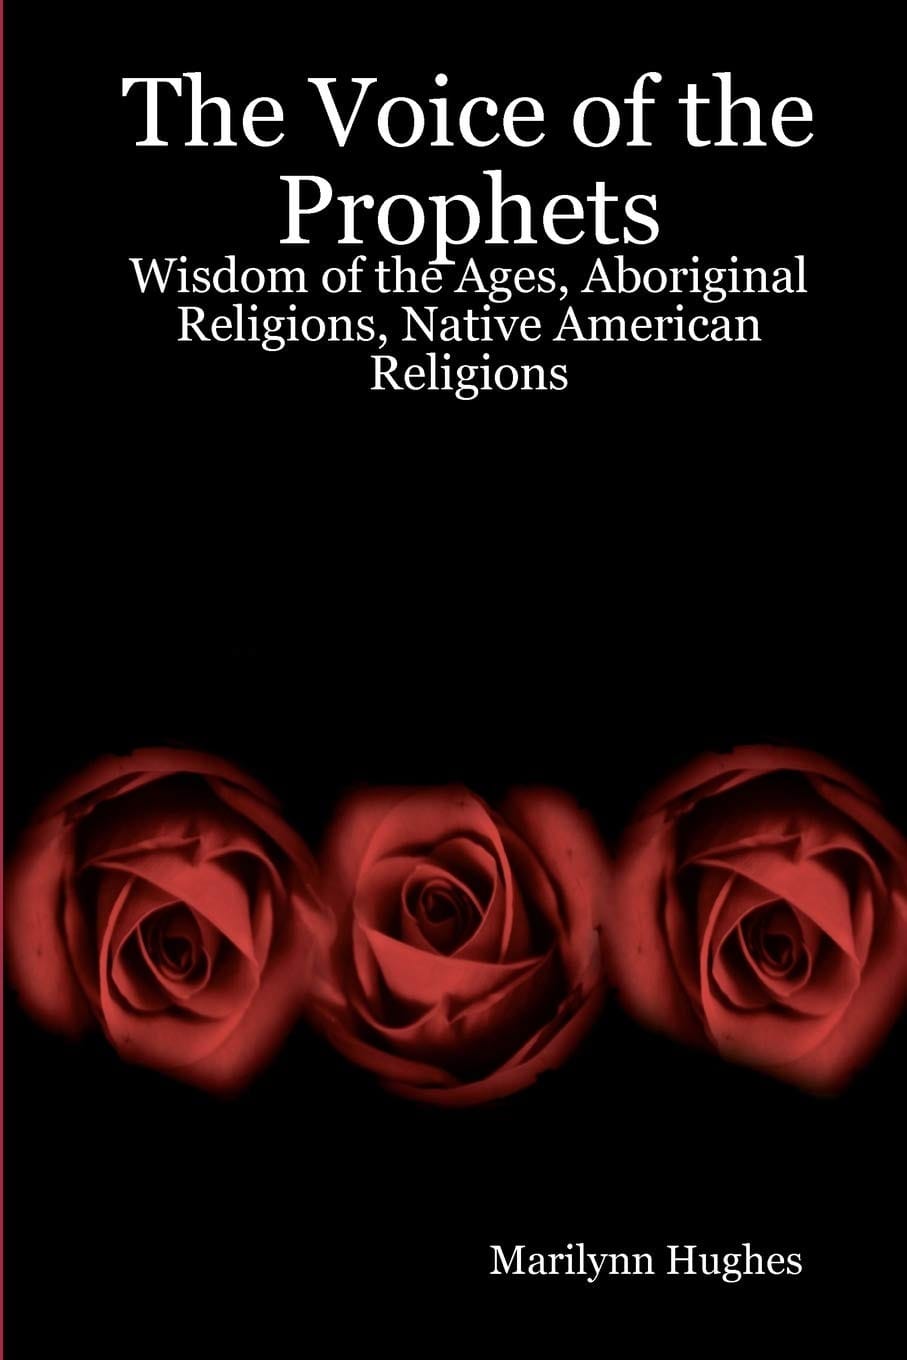 Wisdom of the Ages, Aboriginal Religions, Native American Religions, By Marilynn Hughes - An Encyclopedia of Ancient Sacred Texts - An Out-of-Body Travel Book